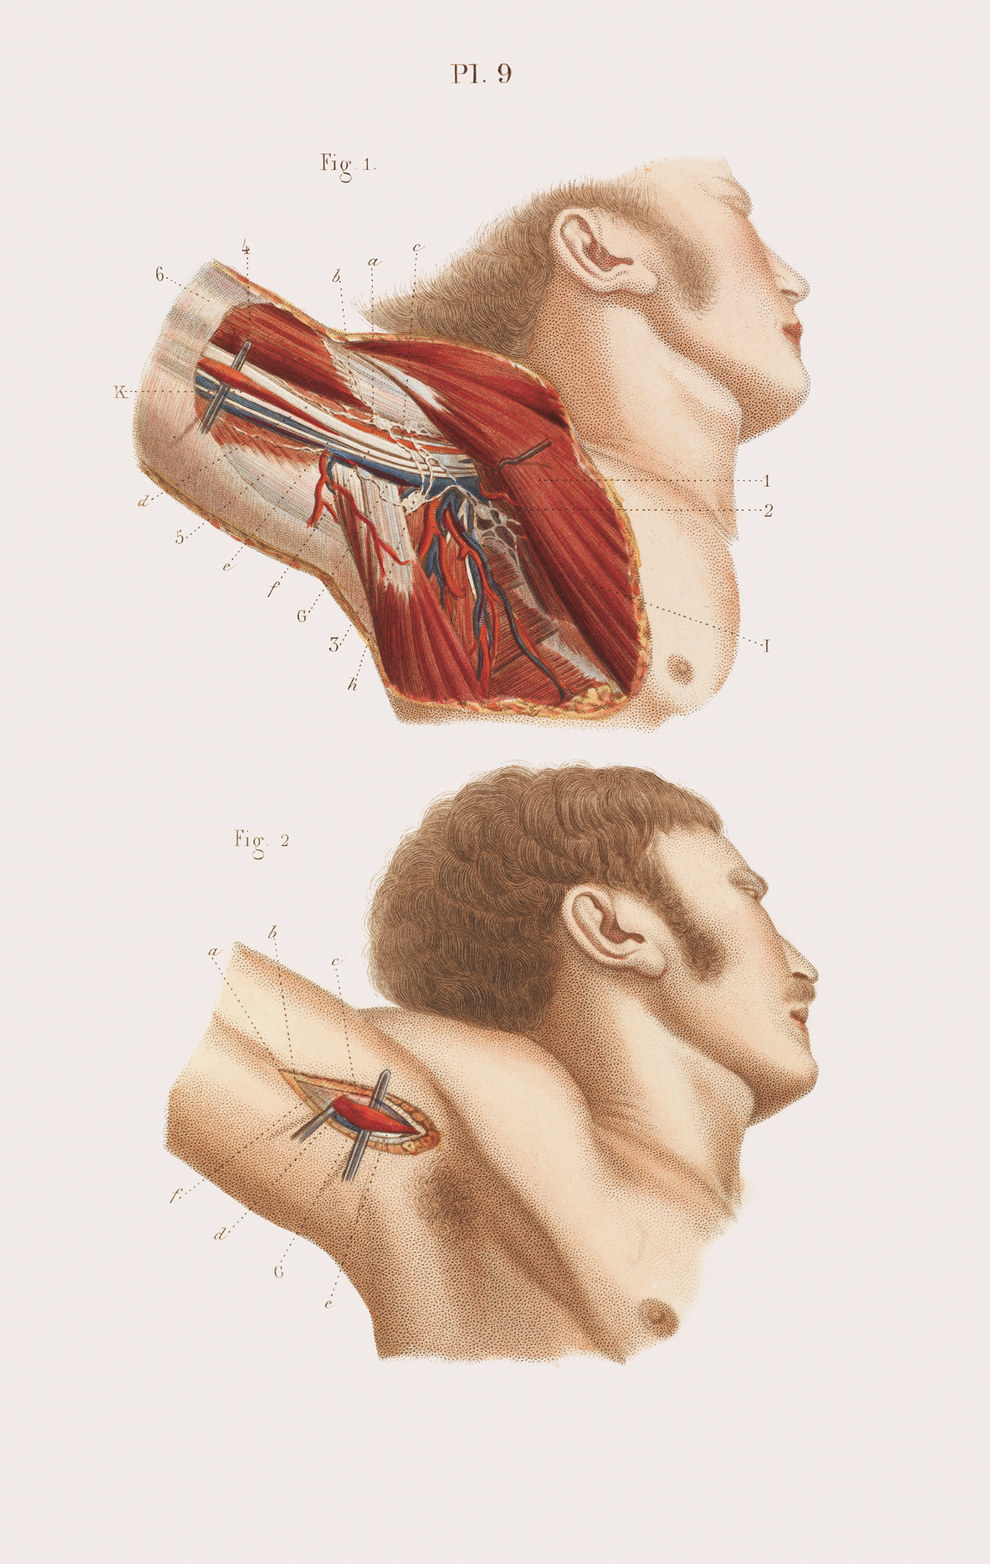 Anatomy of the armpit, and the ligature (clamping by string to stop the blood flow) of a blood vessel near it.